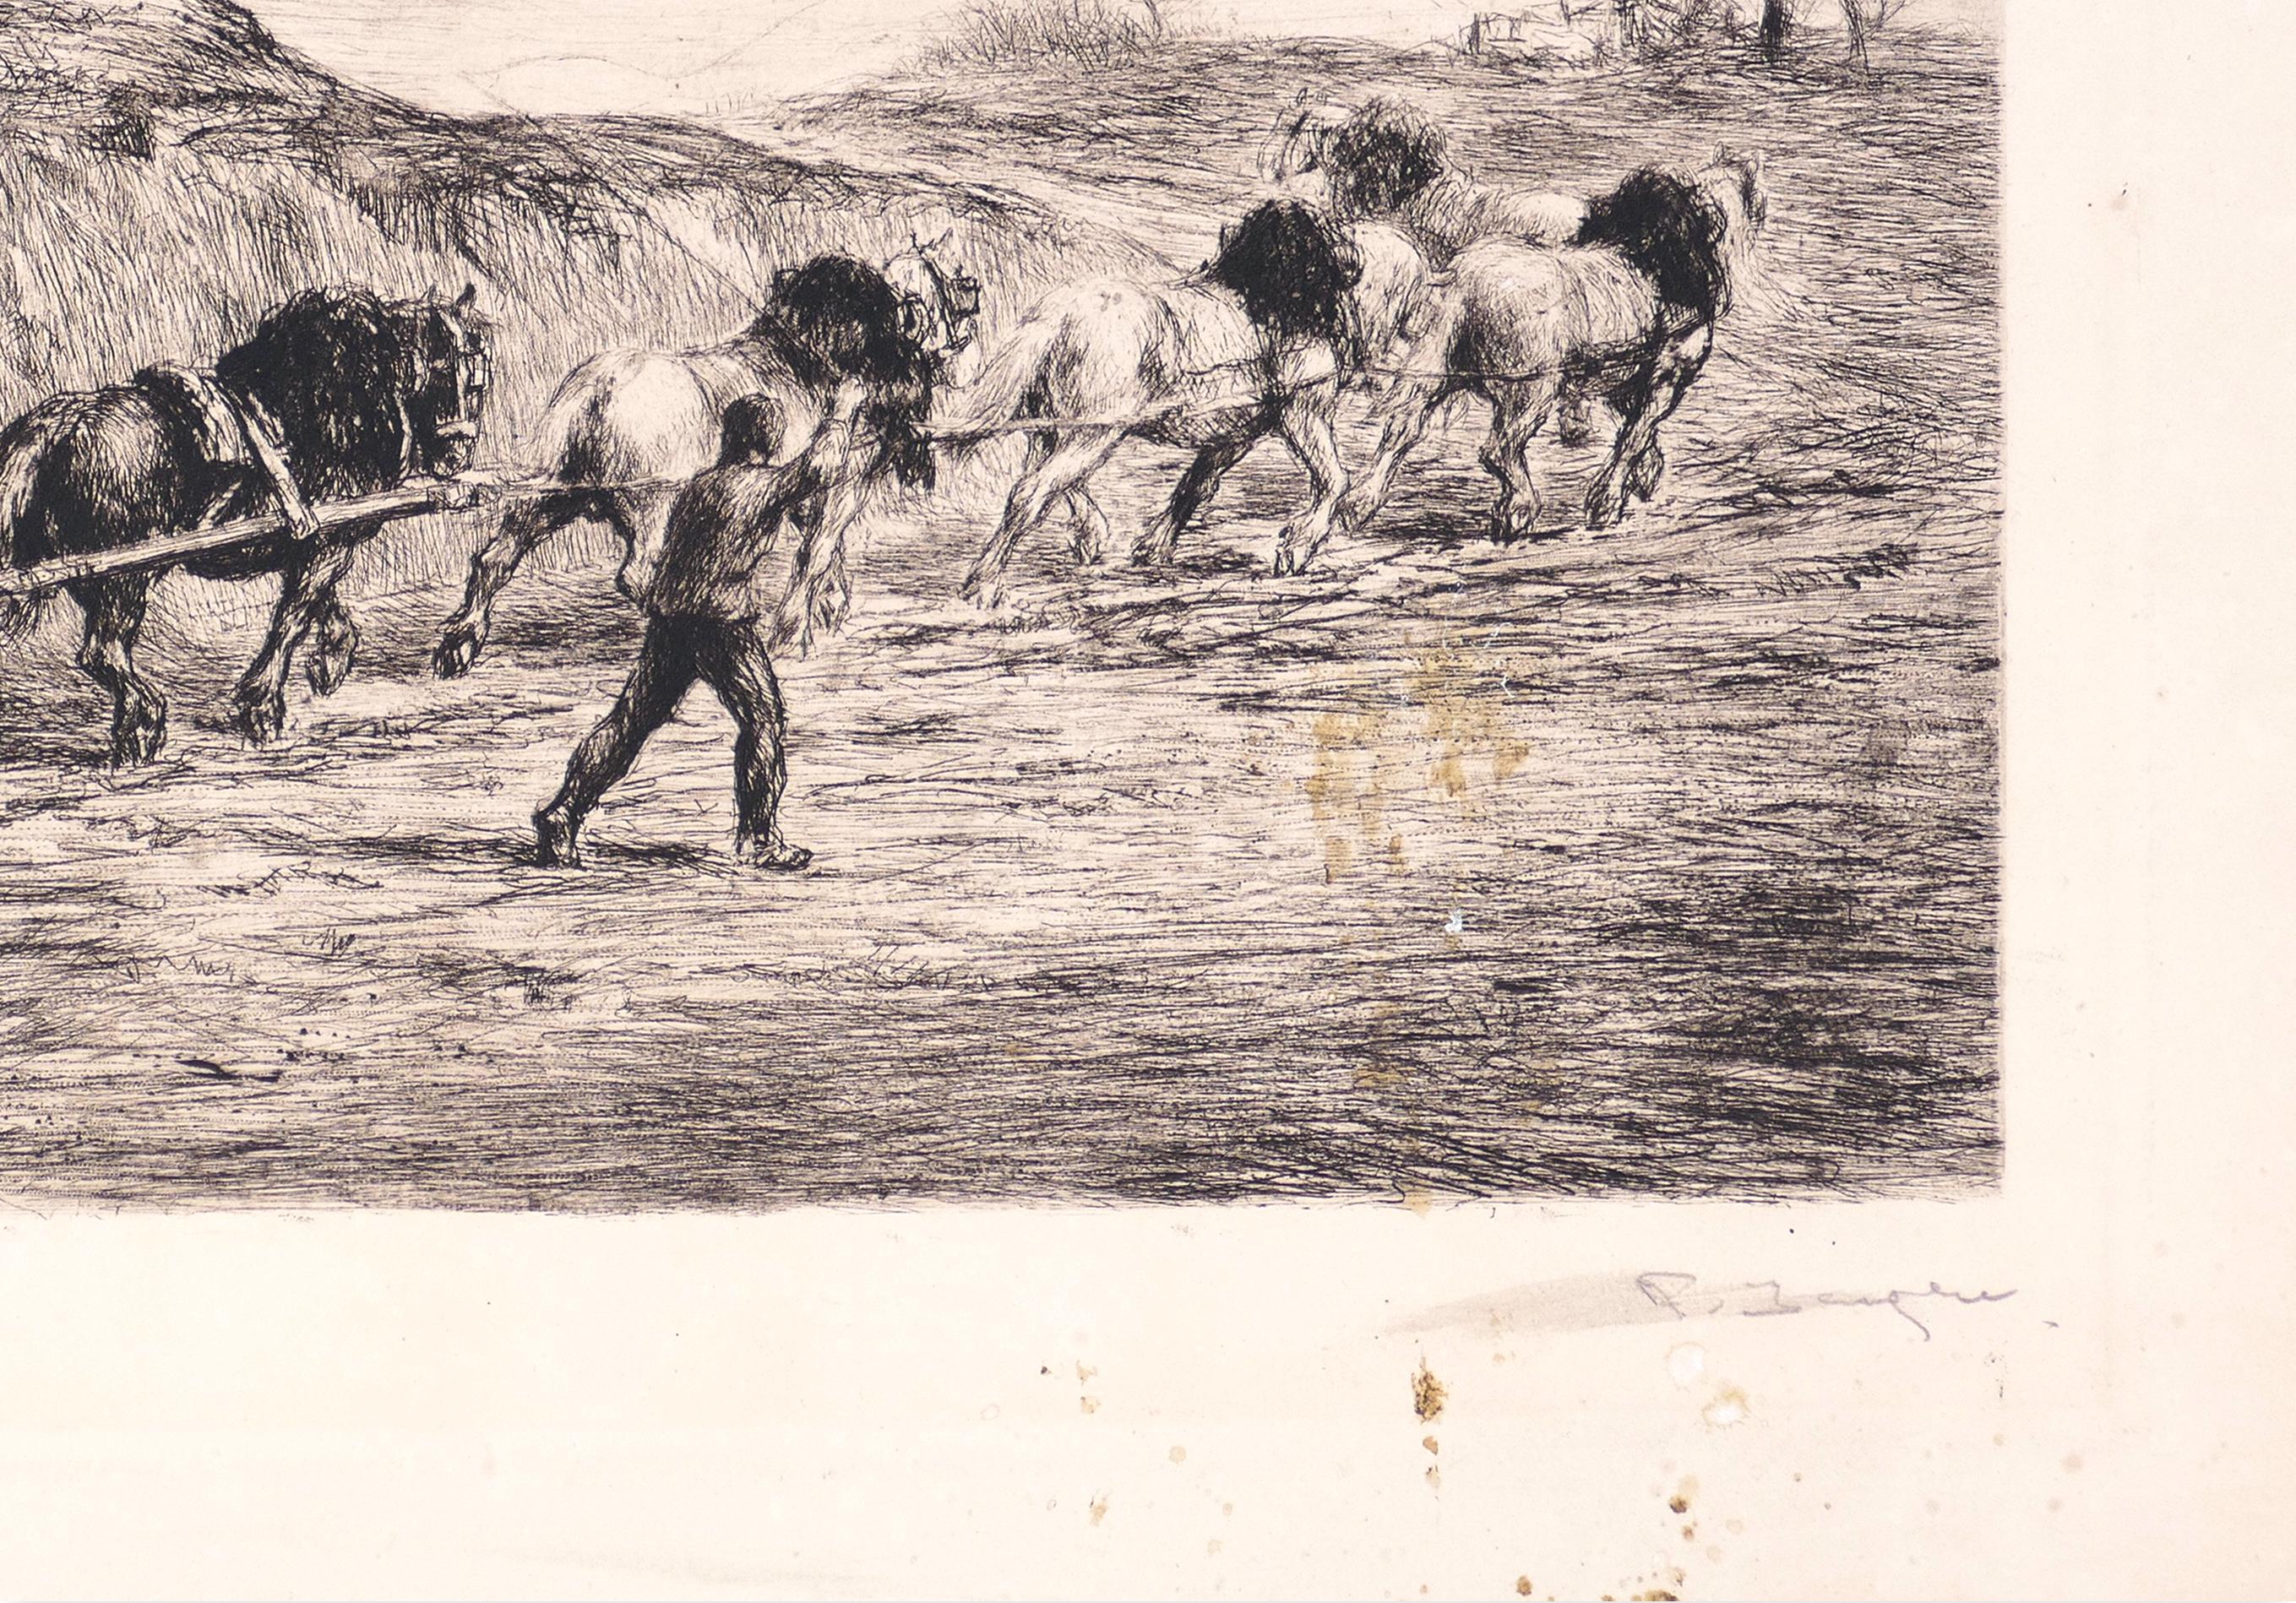 Horse Team - Original Etching by F. Jacque - Late 19th Century - Print by Frédéric Jacque